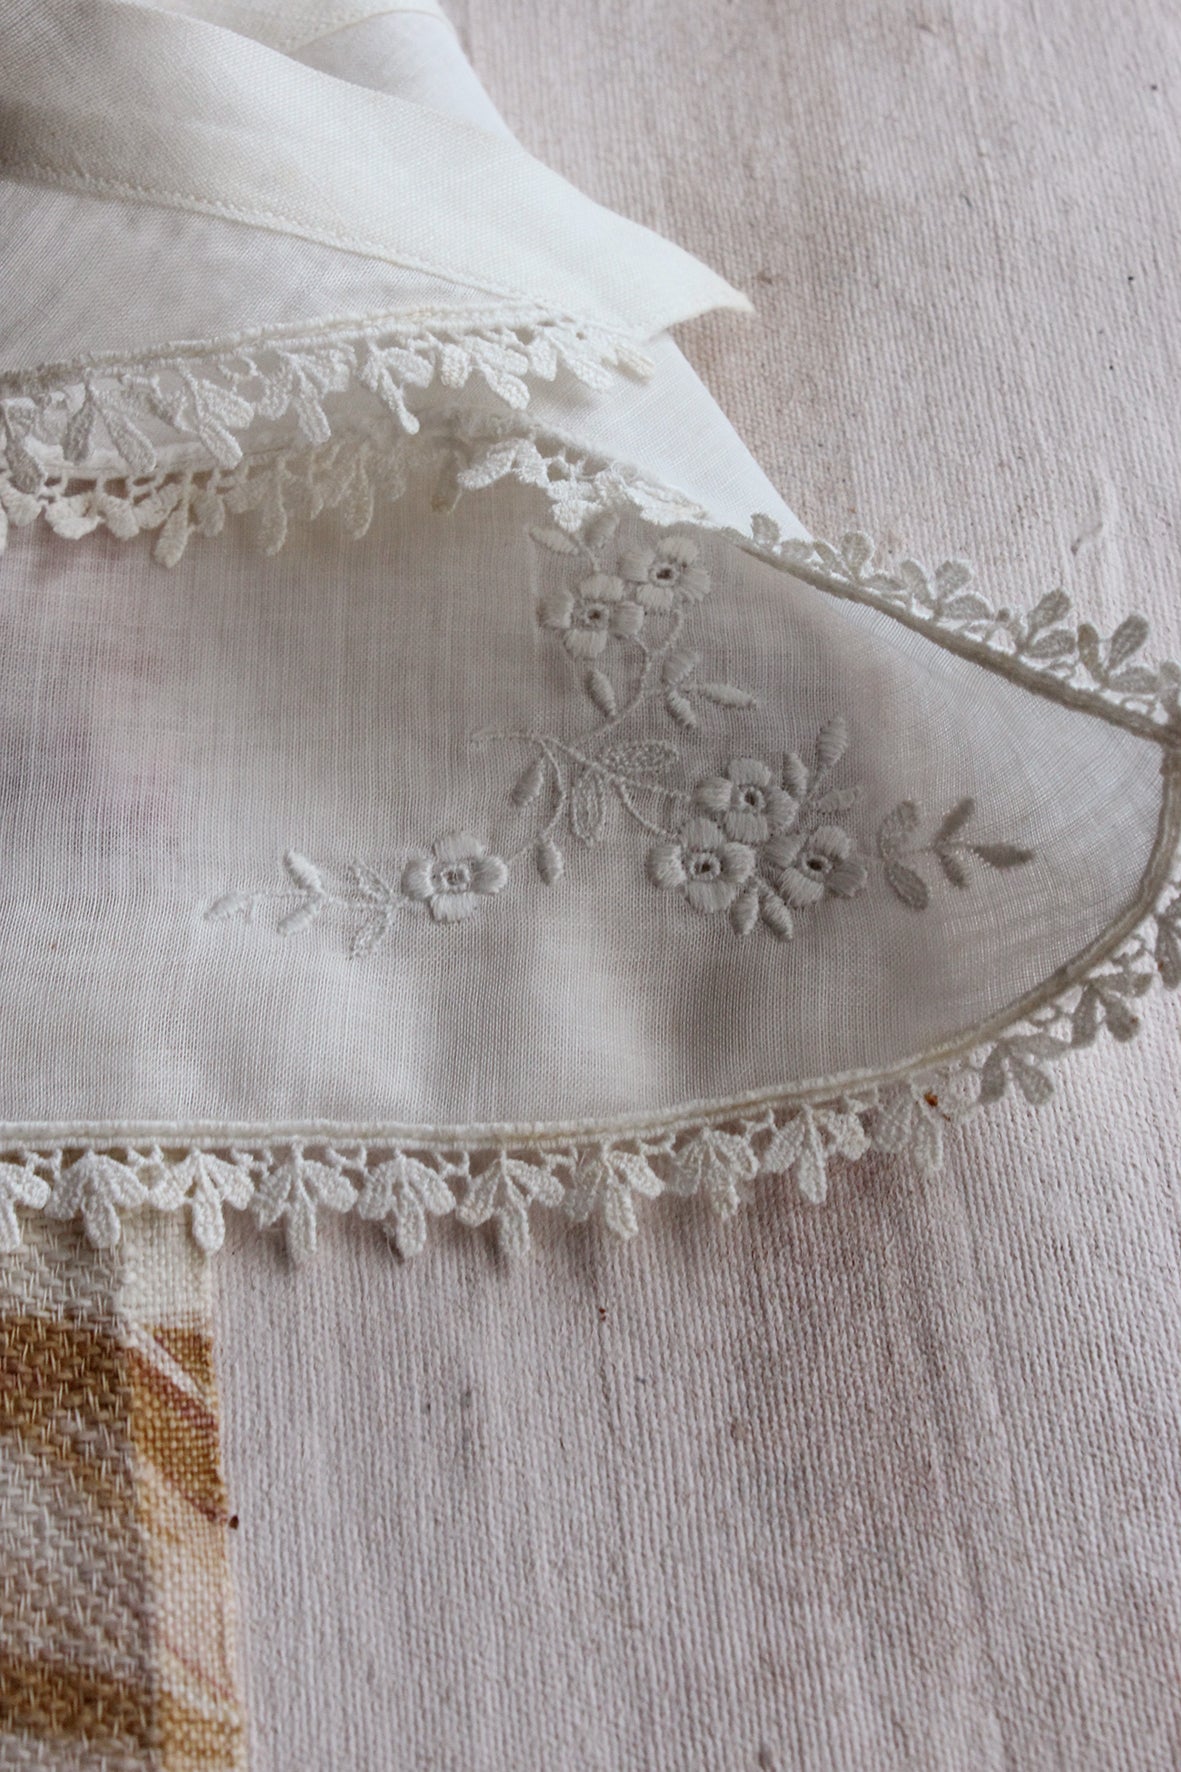 Old Embroidered Lace & Lawn Dress Collar